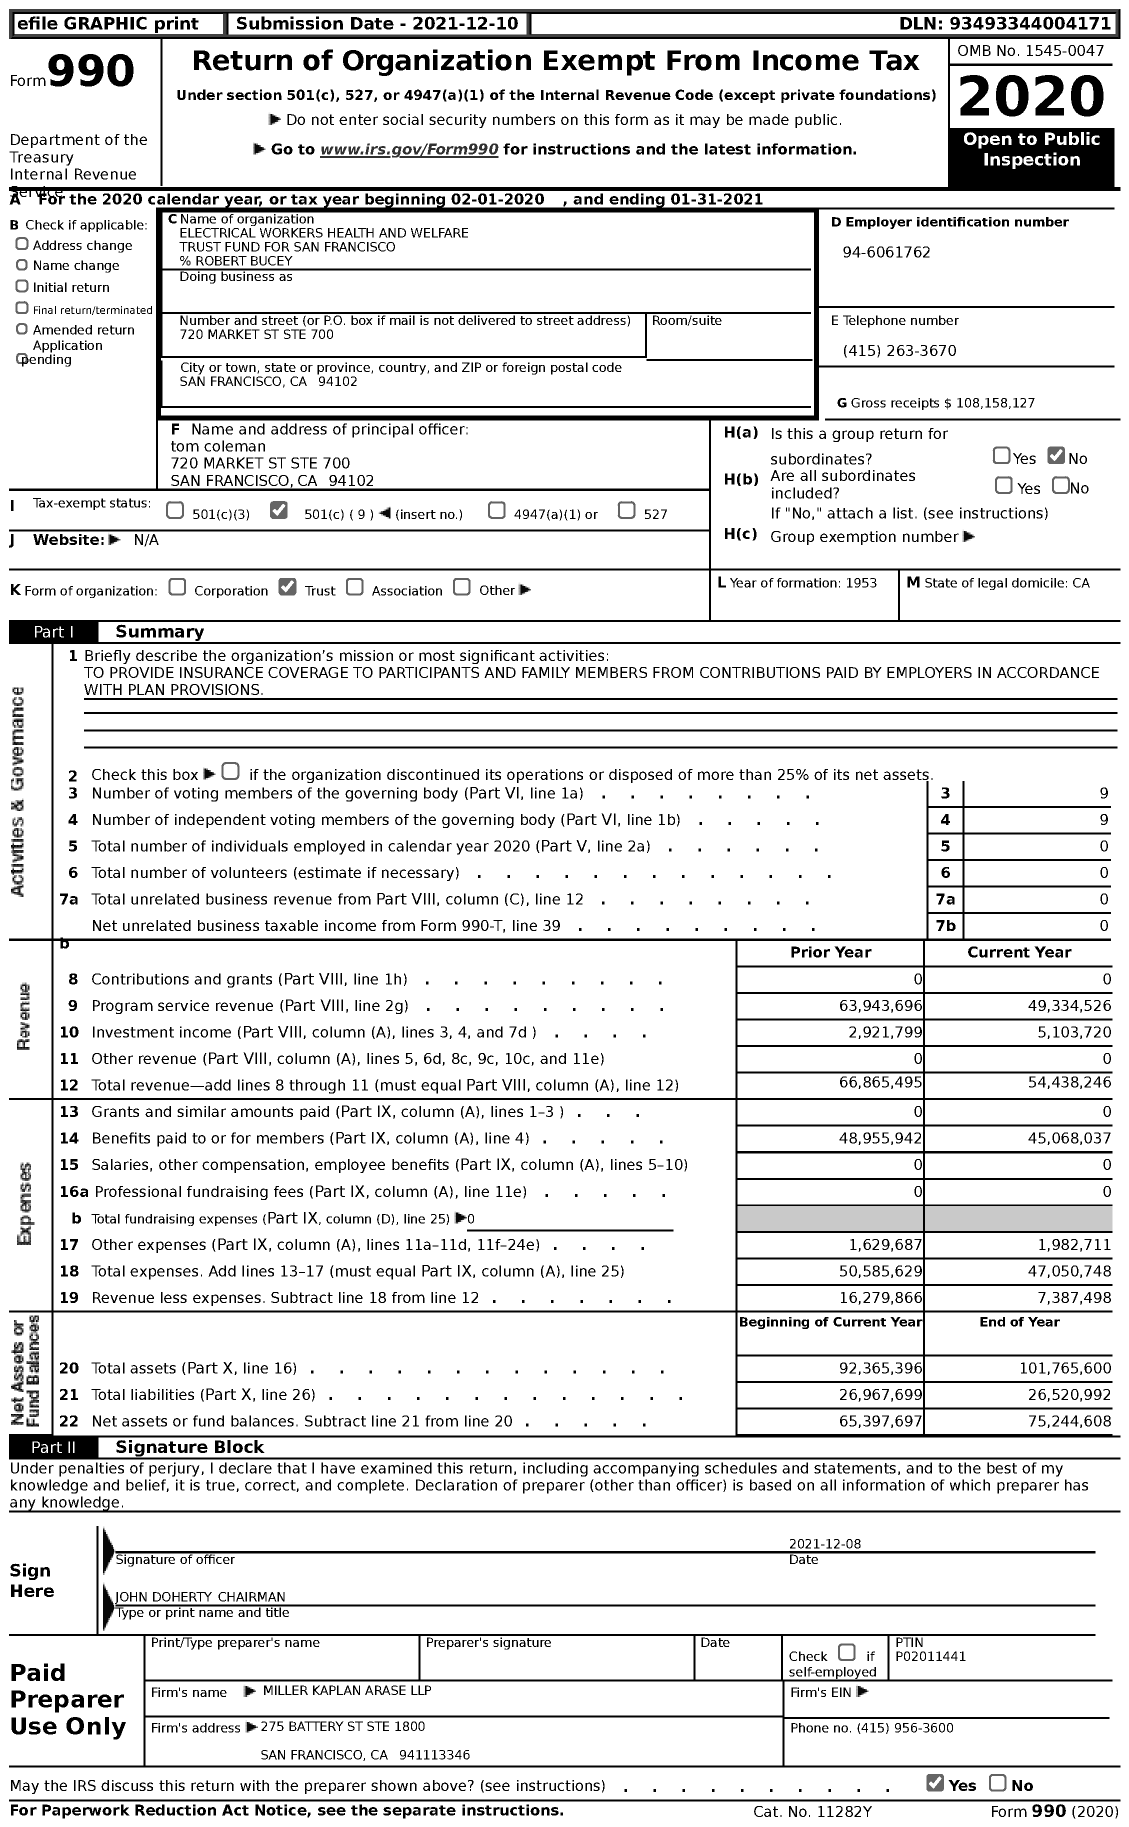 Image of first page of 2020 Form 990 for Electrical Workers Health and Welfare Trust Fund for San Francisco